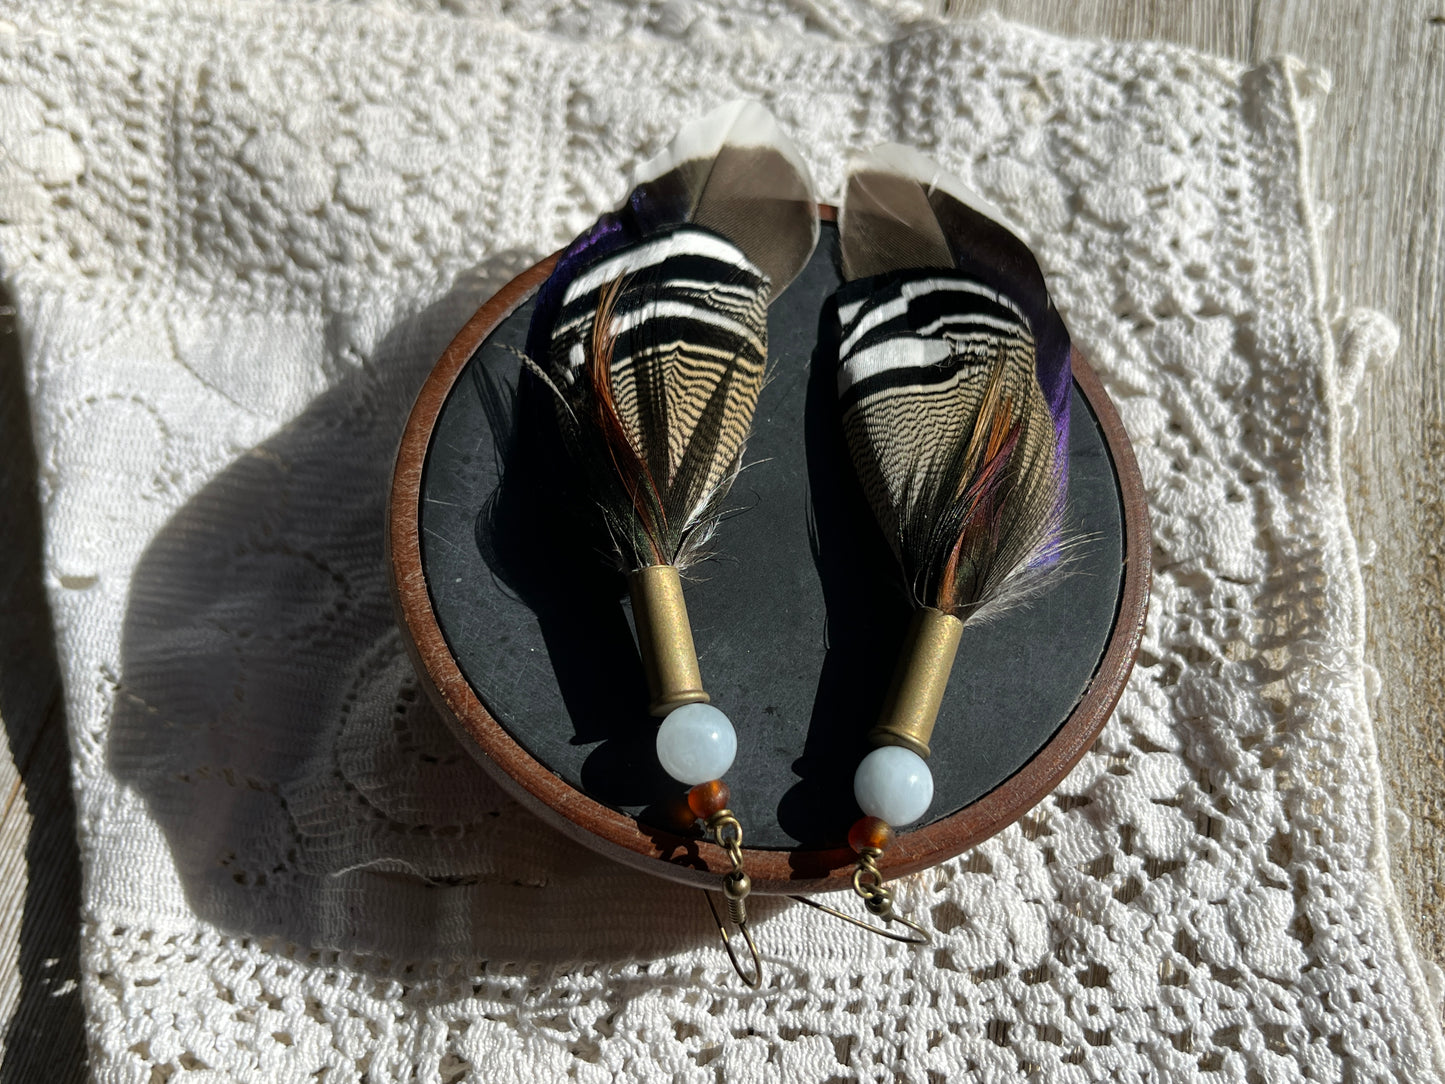 Feather + Recycled .22 Casing Earrings